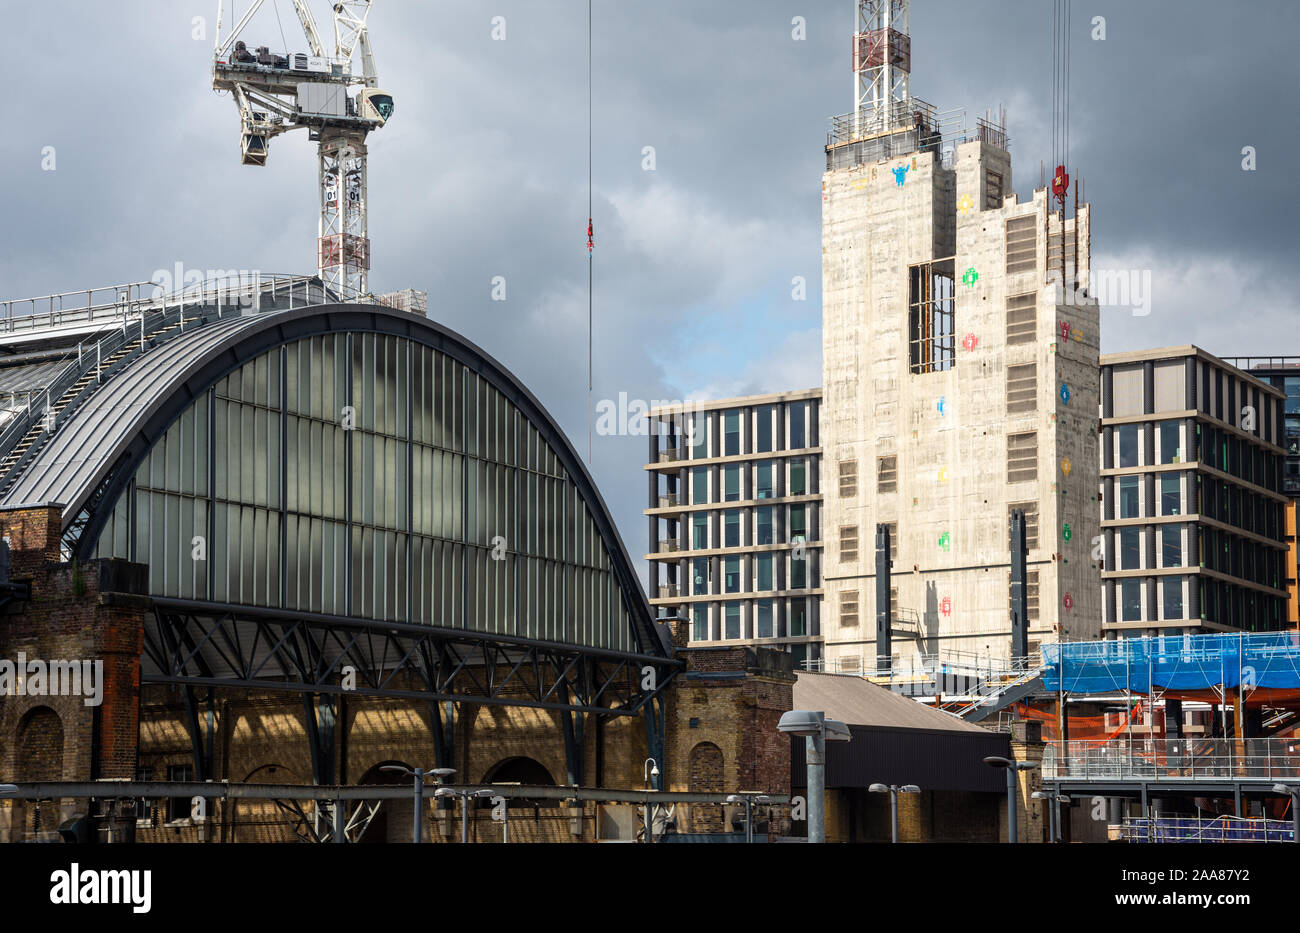 London, England, UK - August 2, 2019: Tower cranes stand over the construction site of Google's UK offices beside the Victorian canopy of King's Cross Stock Photo